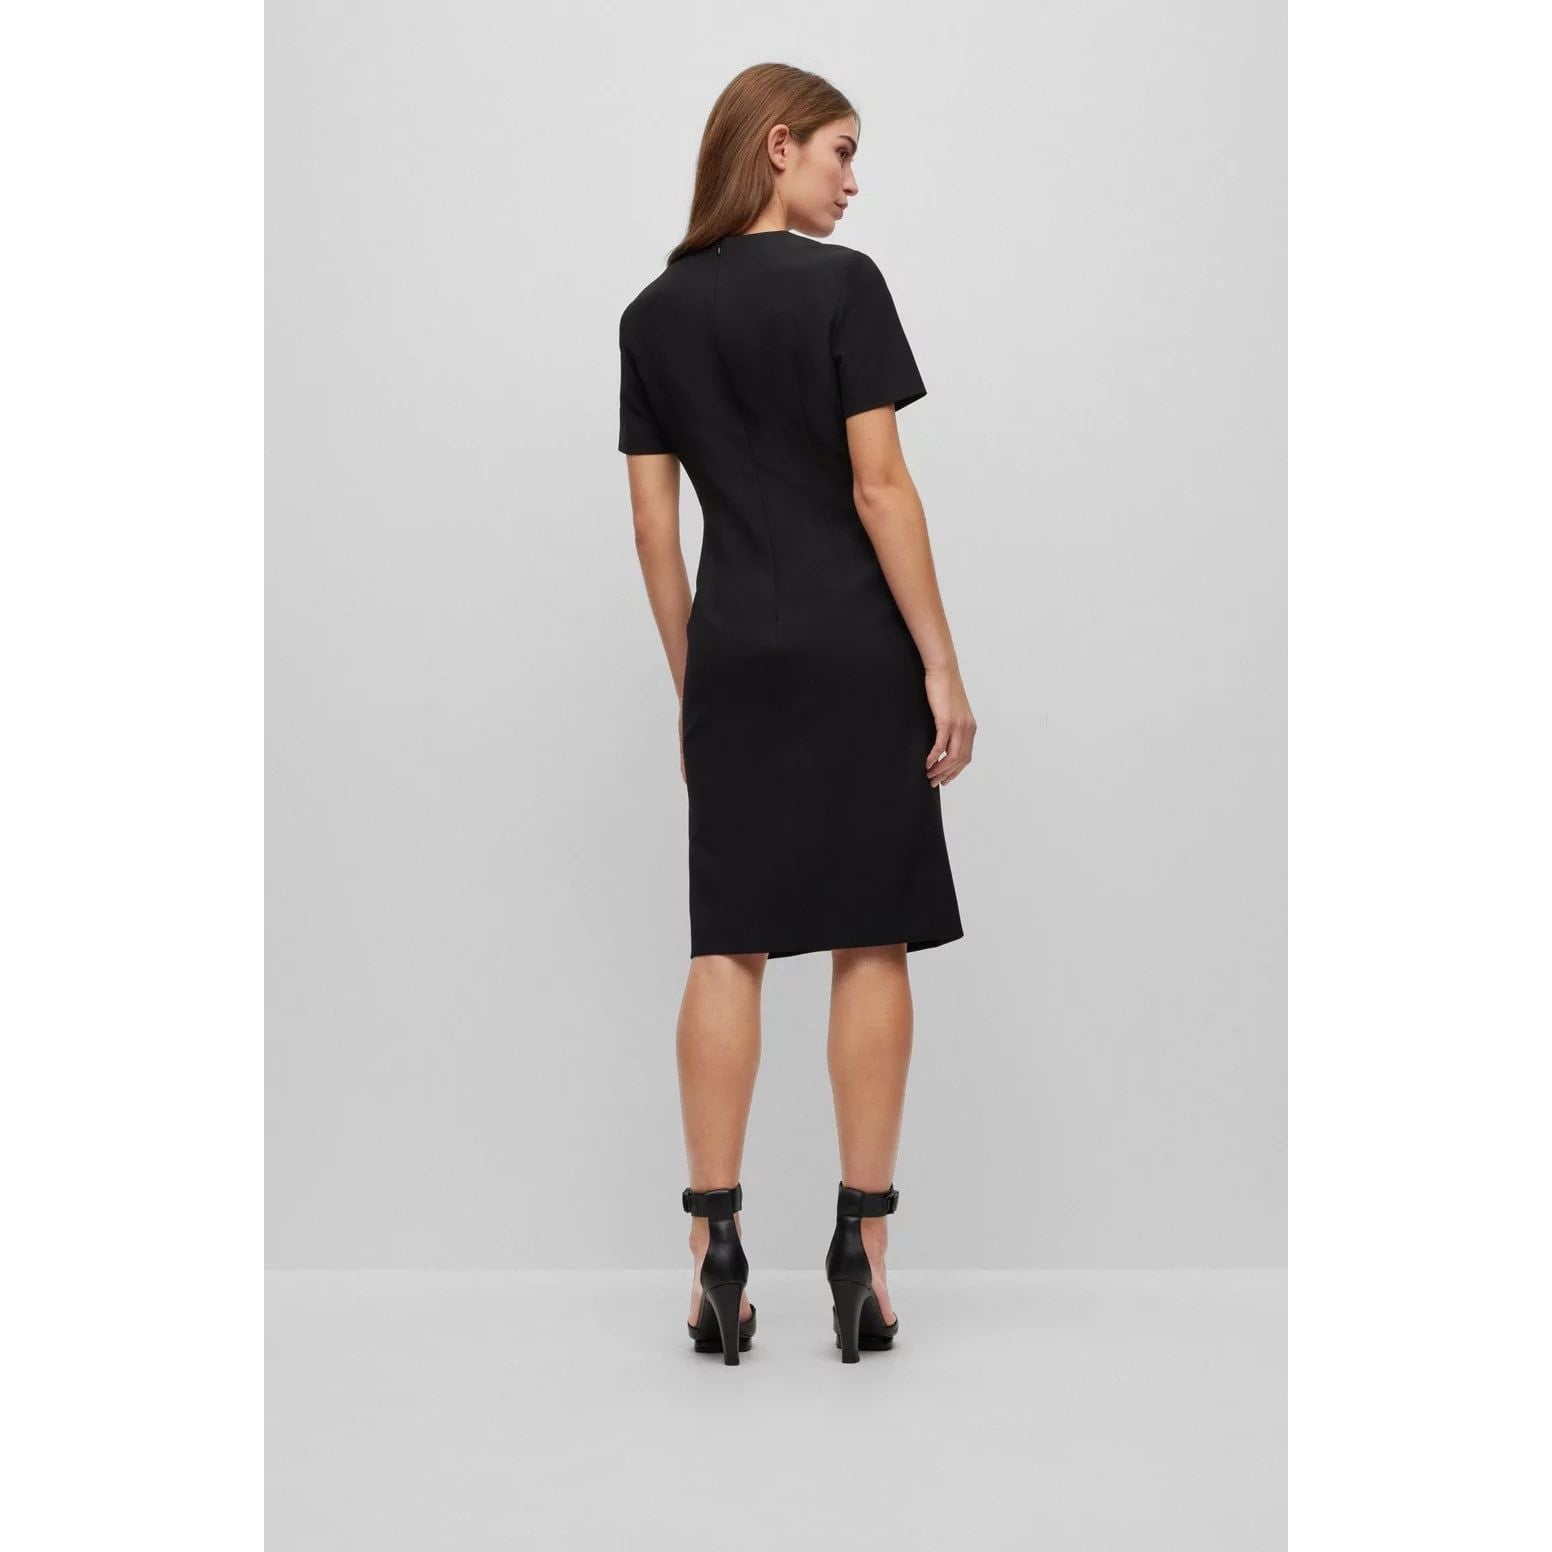 BOSS V-NECK DRESS WITH ZIP DETAILS - Yooto